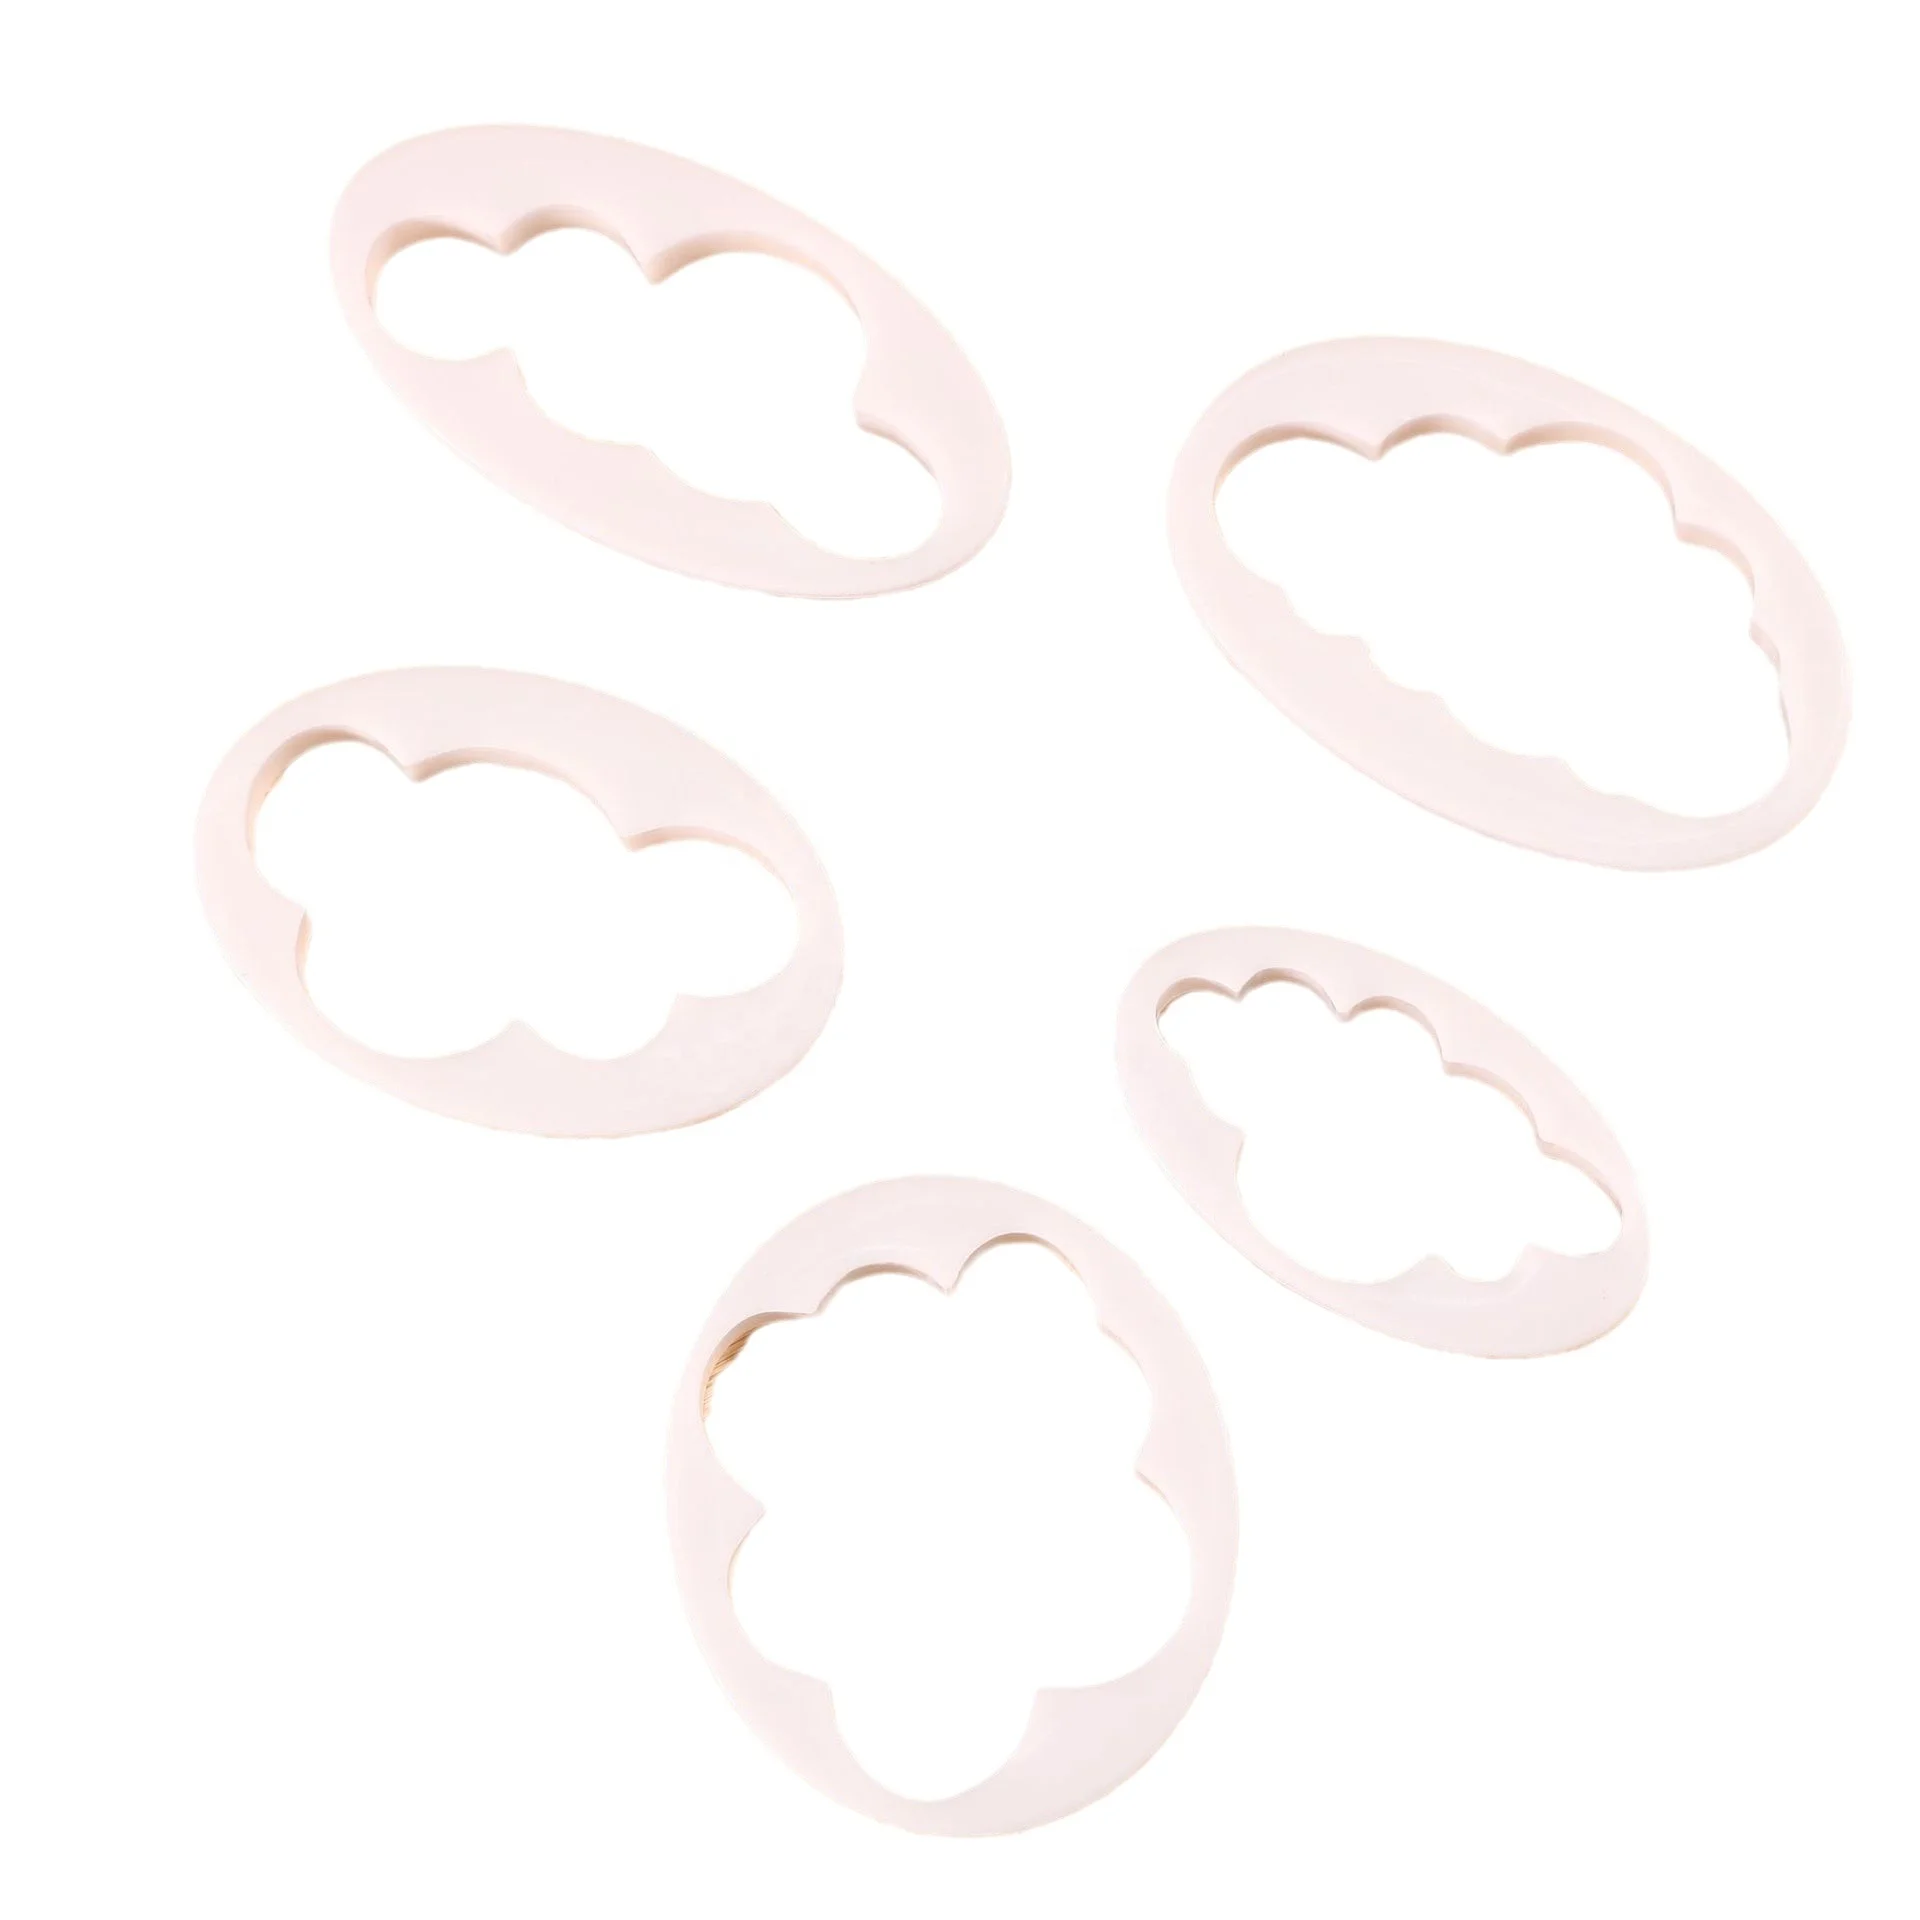 New Plastic Cake Decorating Tools Clouds Embossing Mould 5Pcs Set Cookie Cutter Pastry Molds Kitchen Baking Utensils Cake Tools